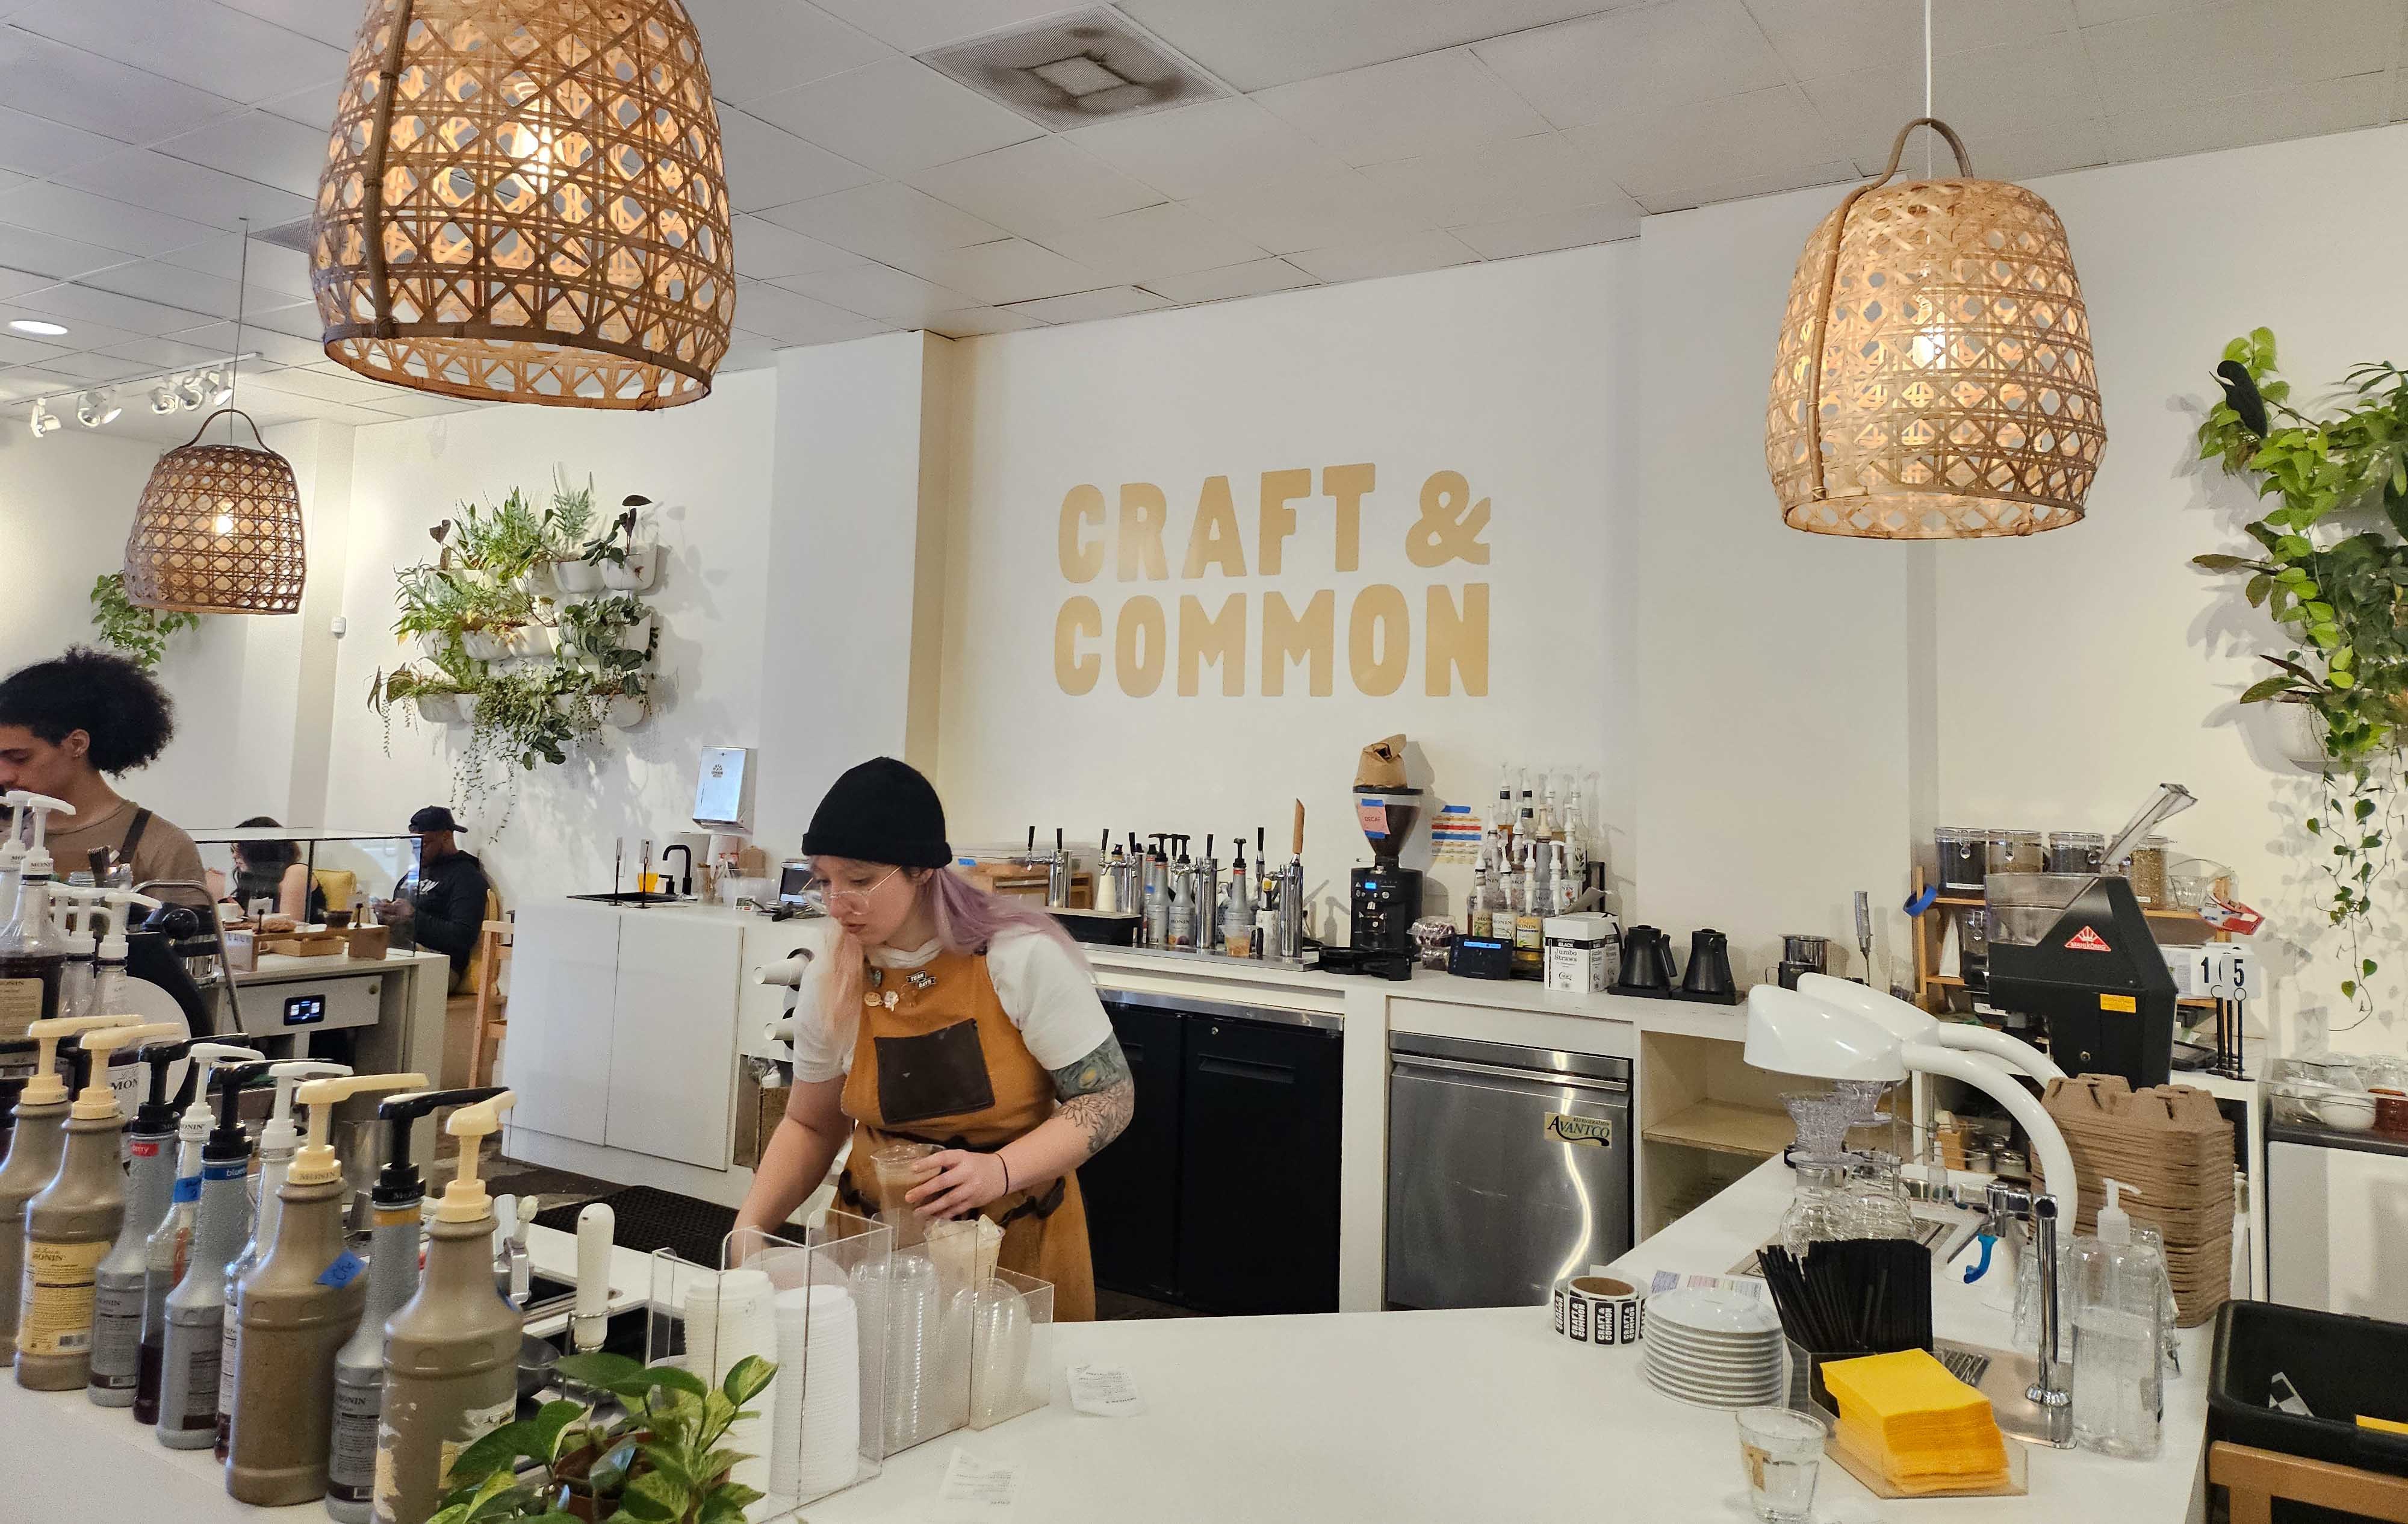 Craft and common coffee bar and logo